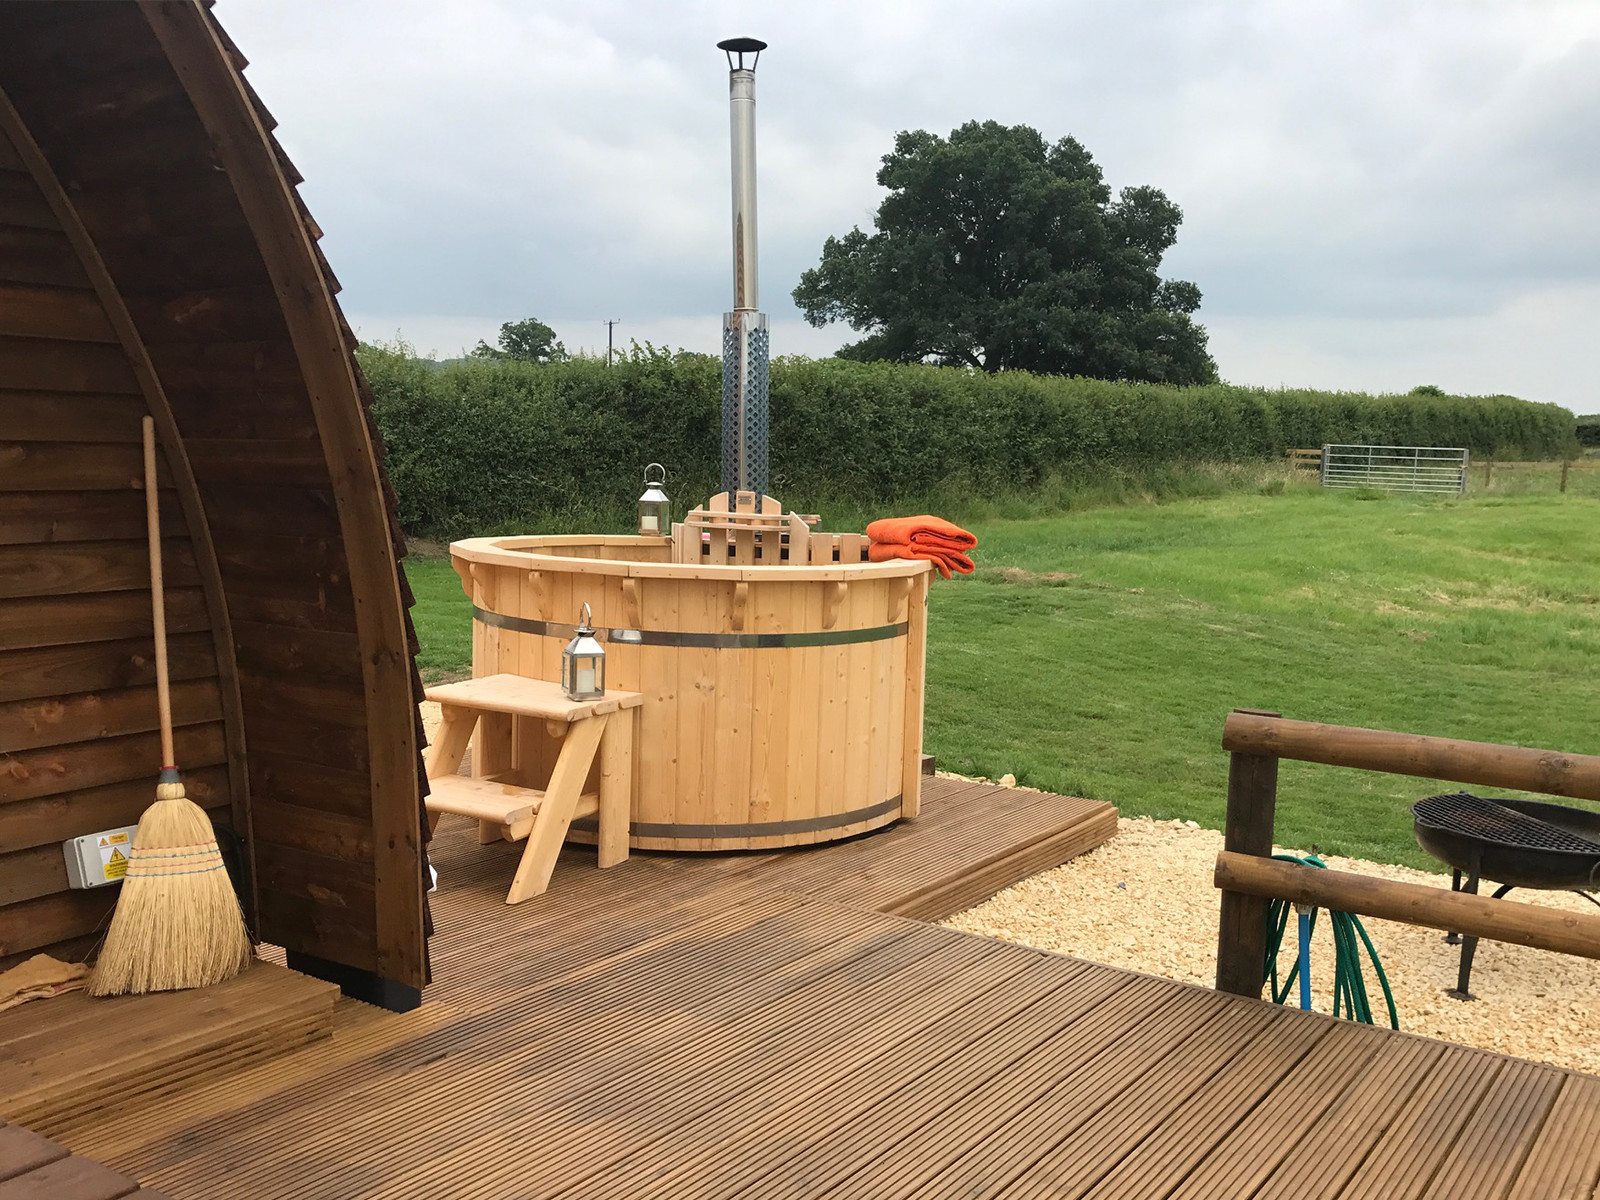 Luxury glamping pods with wood fired hot tubs at Evenlode Grounds Farm